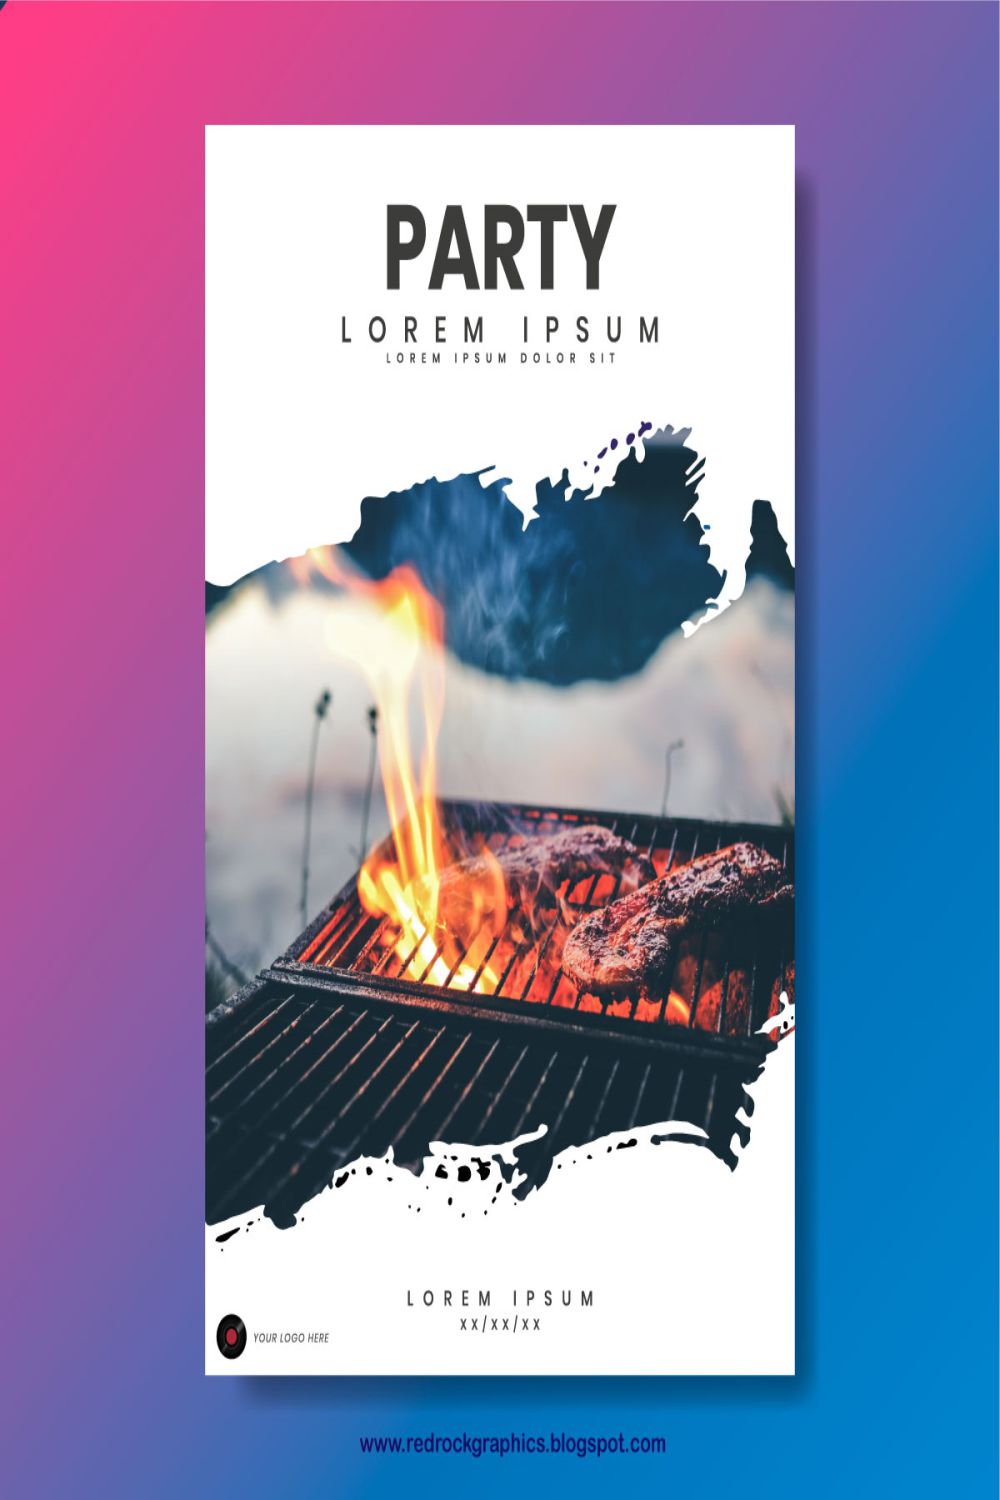 PARTY FLYER TEMPLATE, Party Flyer design, Party Flyer pinterest preview image.